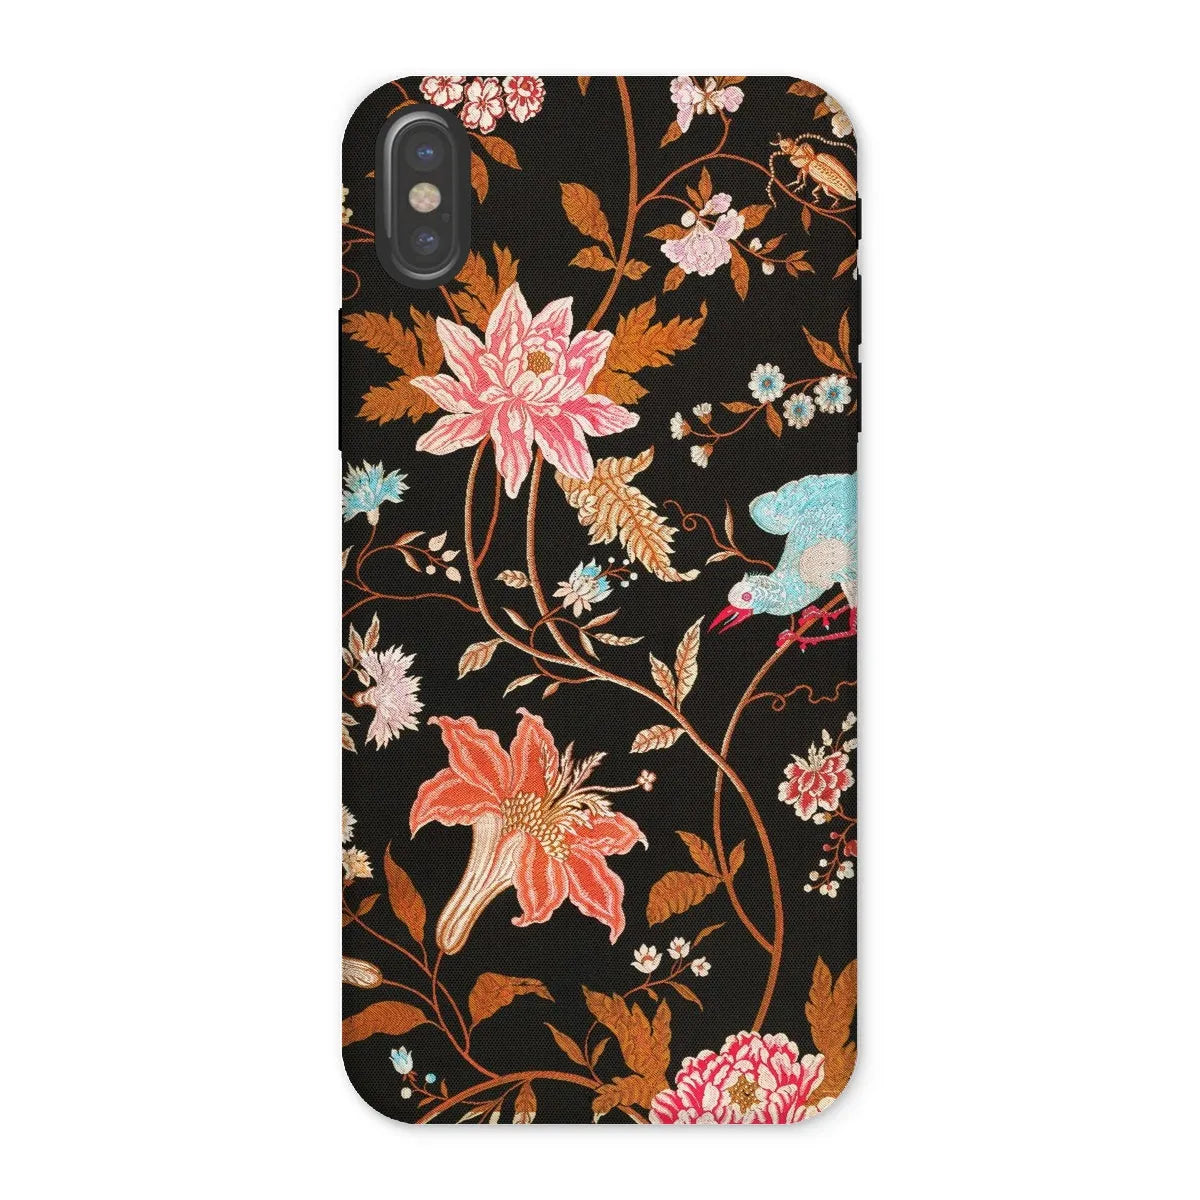 Midnight Call - Indian Aesthetic Fabric Art Phone Case - Iphone x / Matte - Mobile Phone Cases - Aesthetic Art